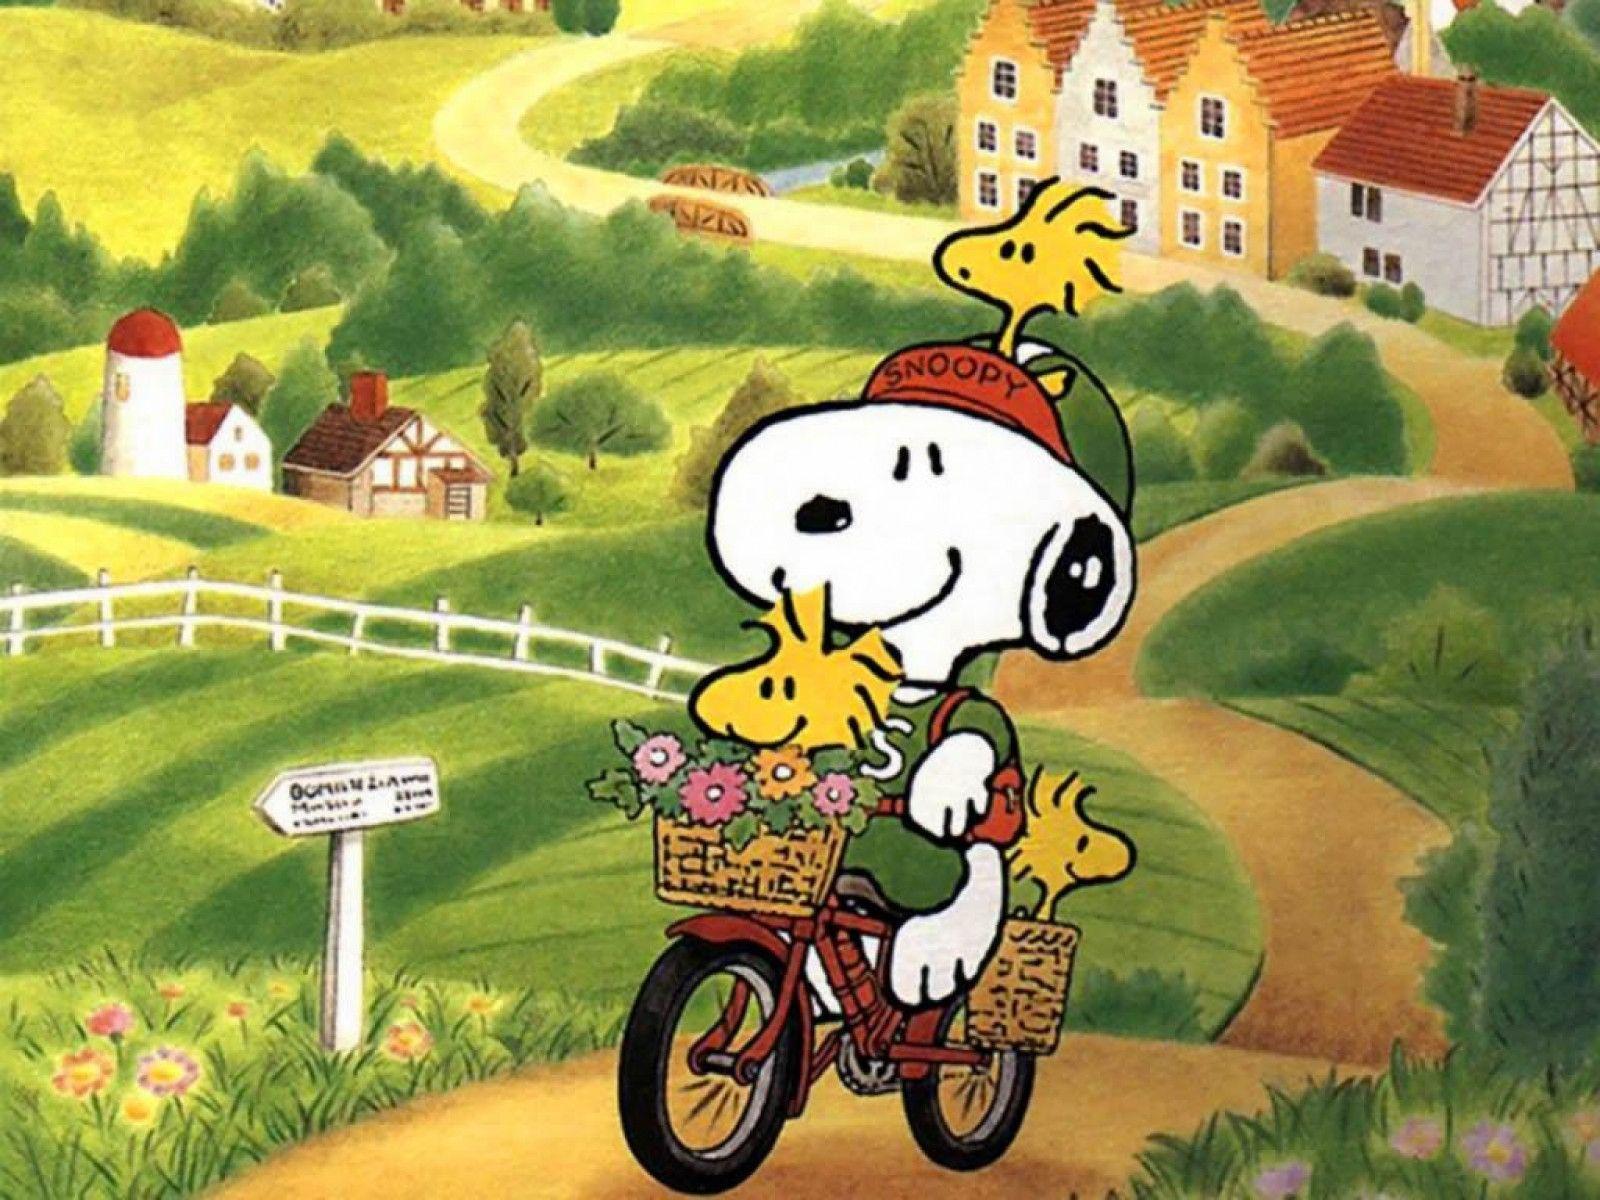 Snoopy Spring Wallpapers